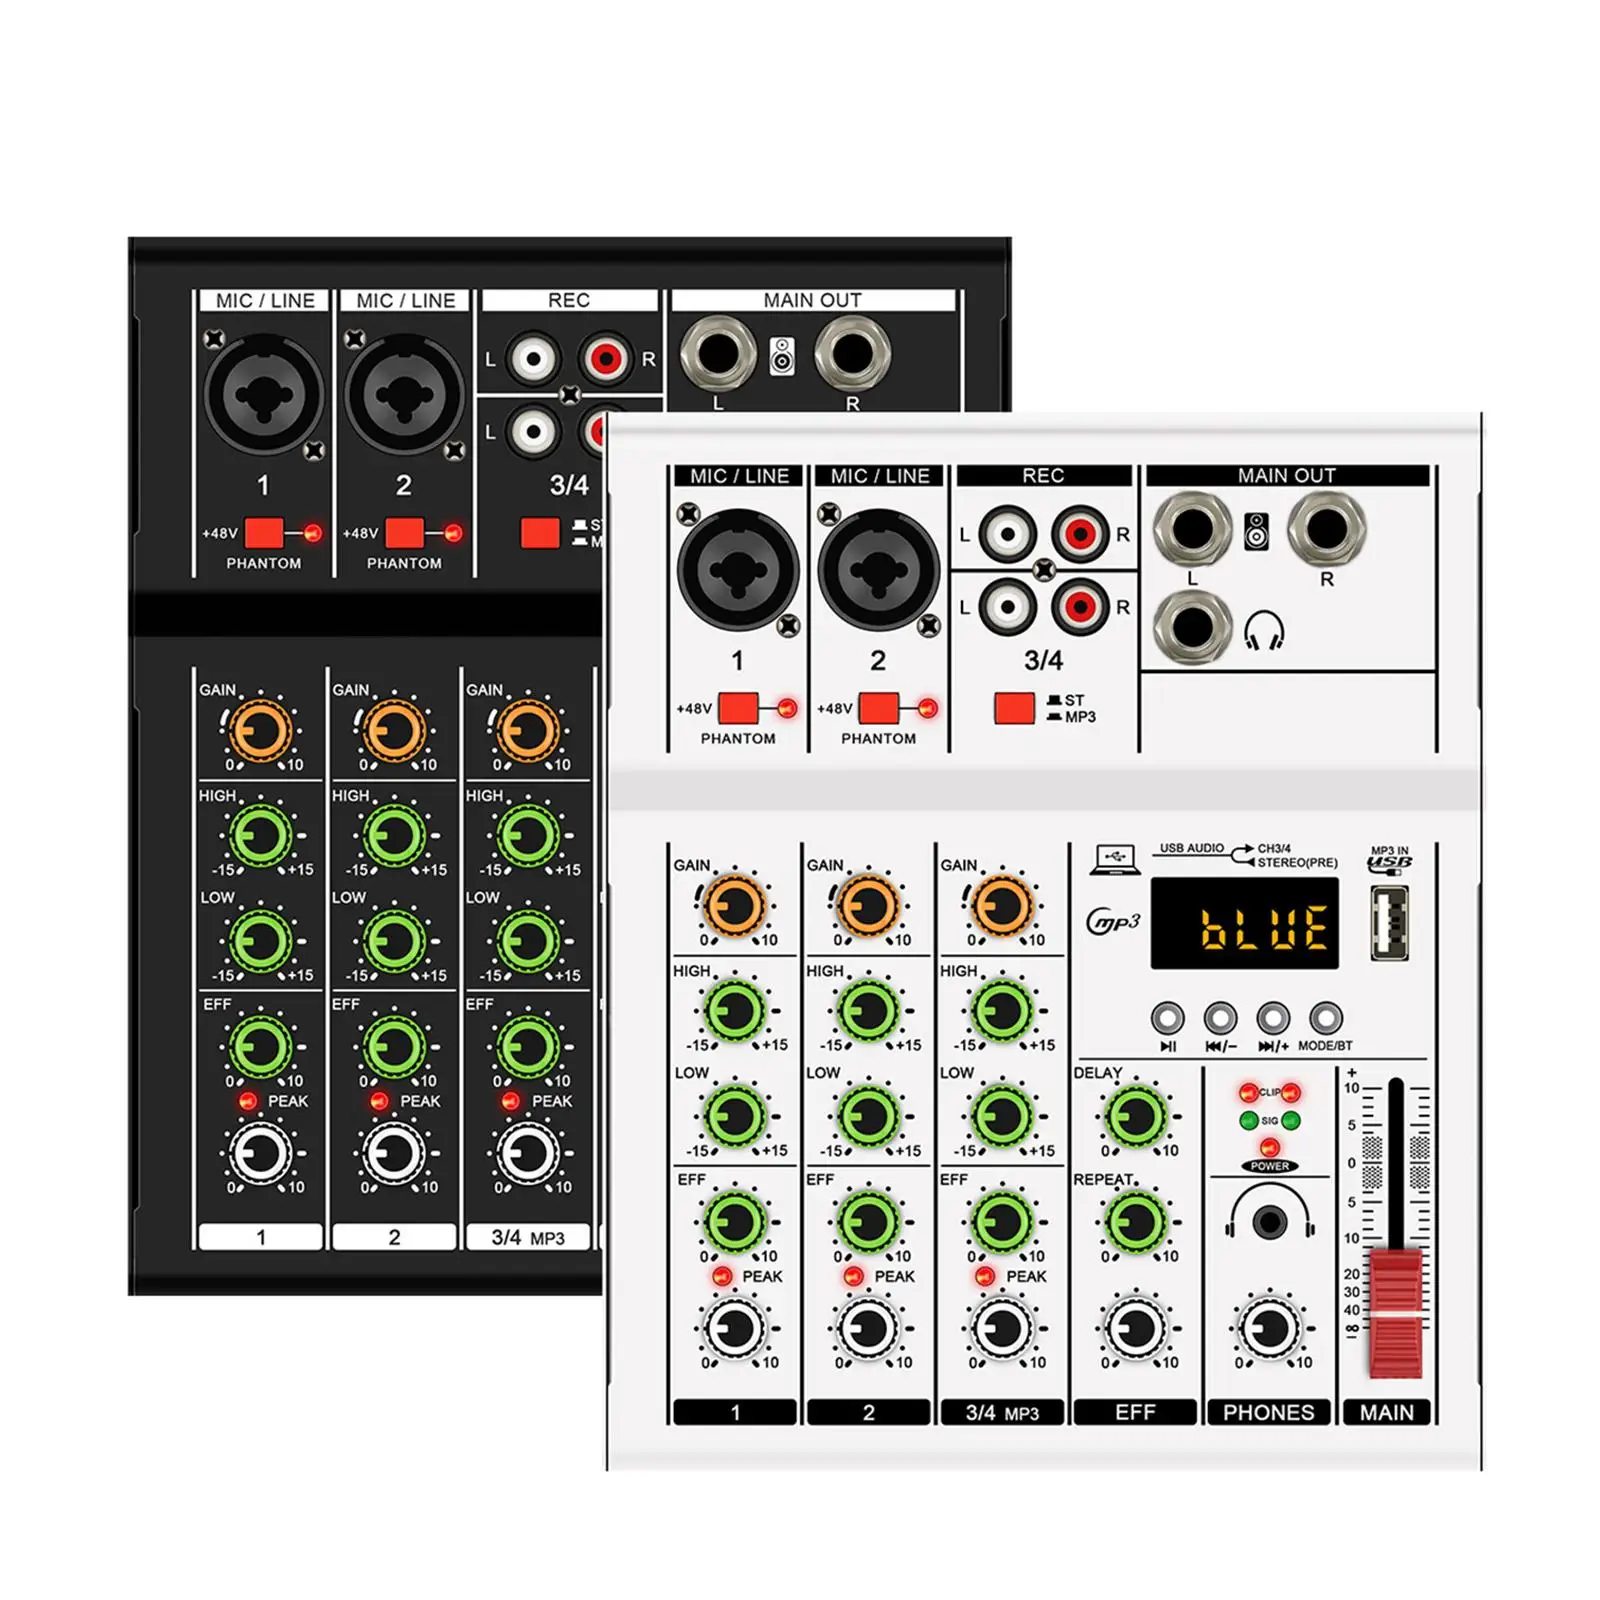 Studio Audio Mixer 4 Channel Portable Professional Sound Board Sound Mixing Console for Karaoke Recording Beginners DJ Broadcast